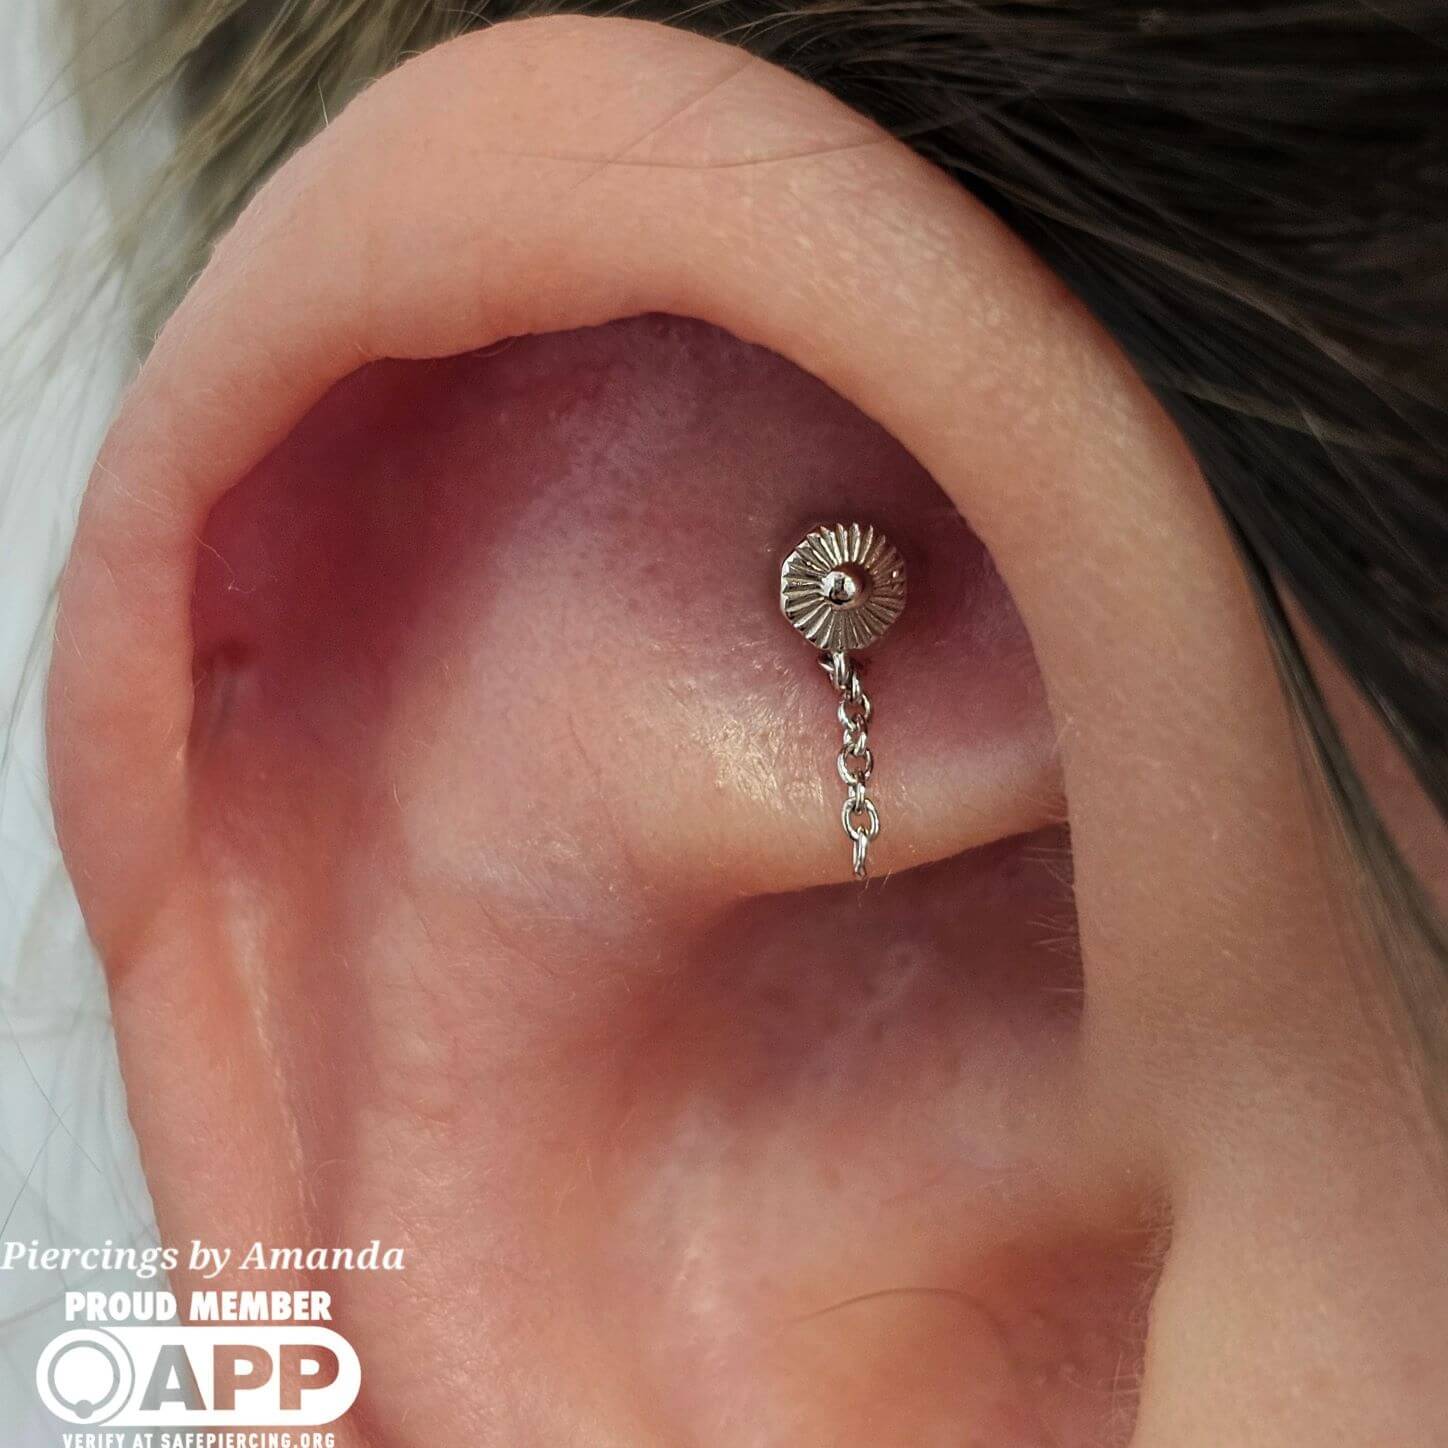 Faux Rook piercing Amanda did with 14k white gold